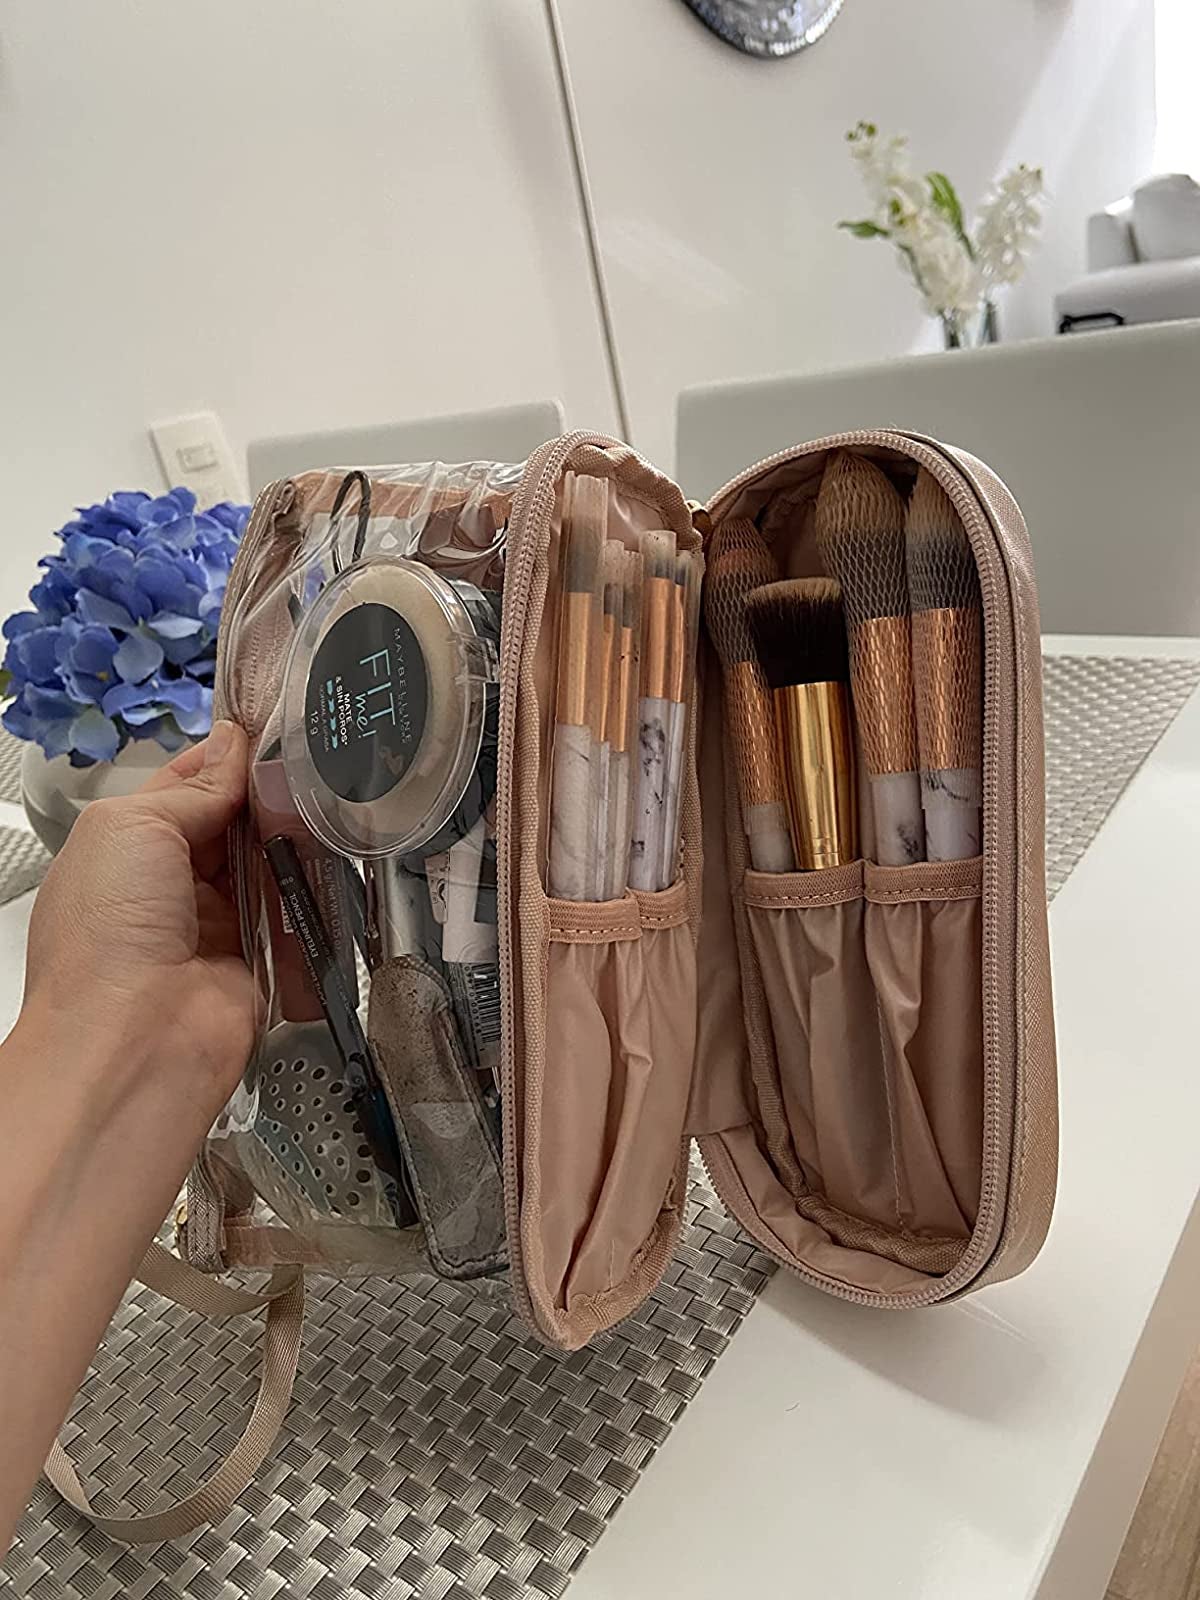 19 Best Travel Makeup Bags For Of Your Products